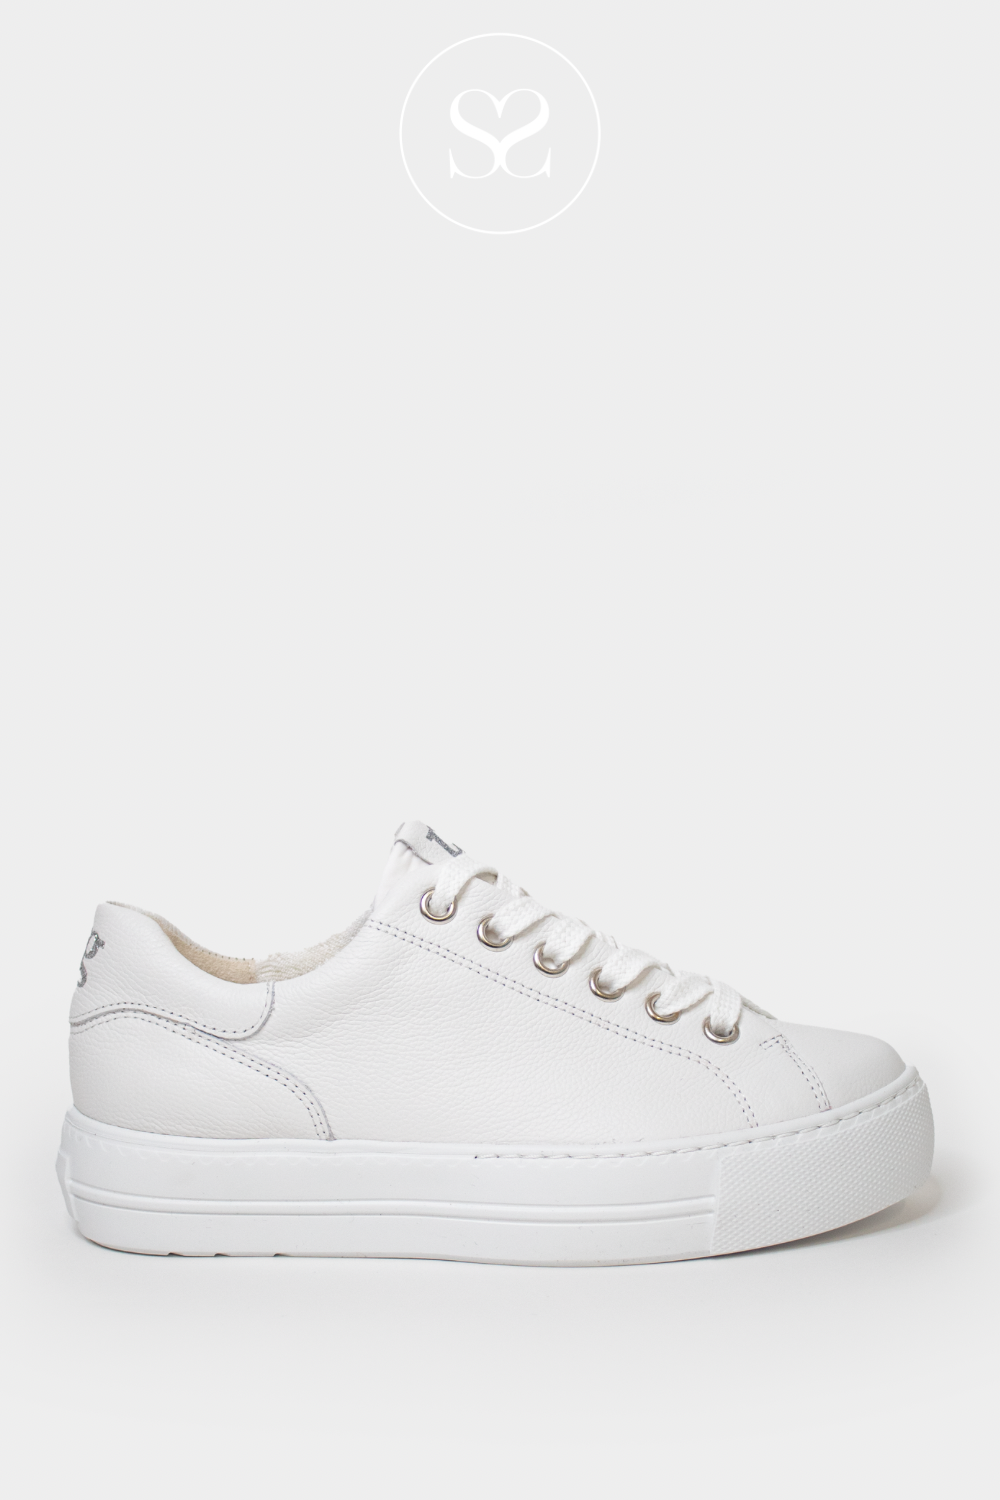 PAUL GREEN 5320 WHITE/SILVER PLATFORM TRAINERS